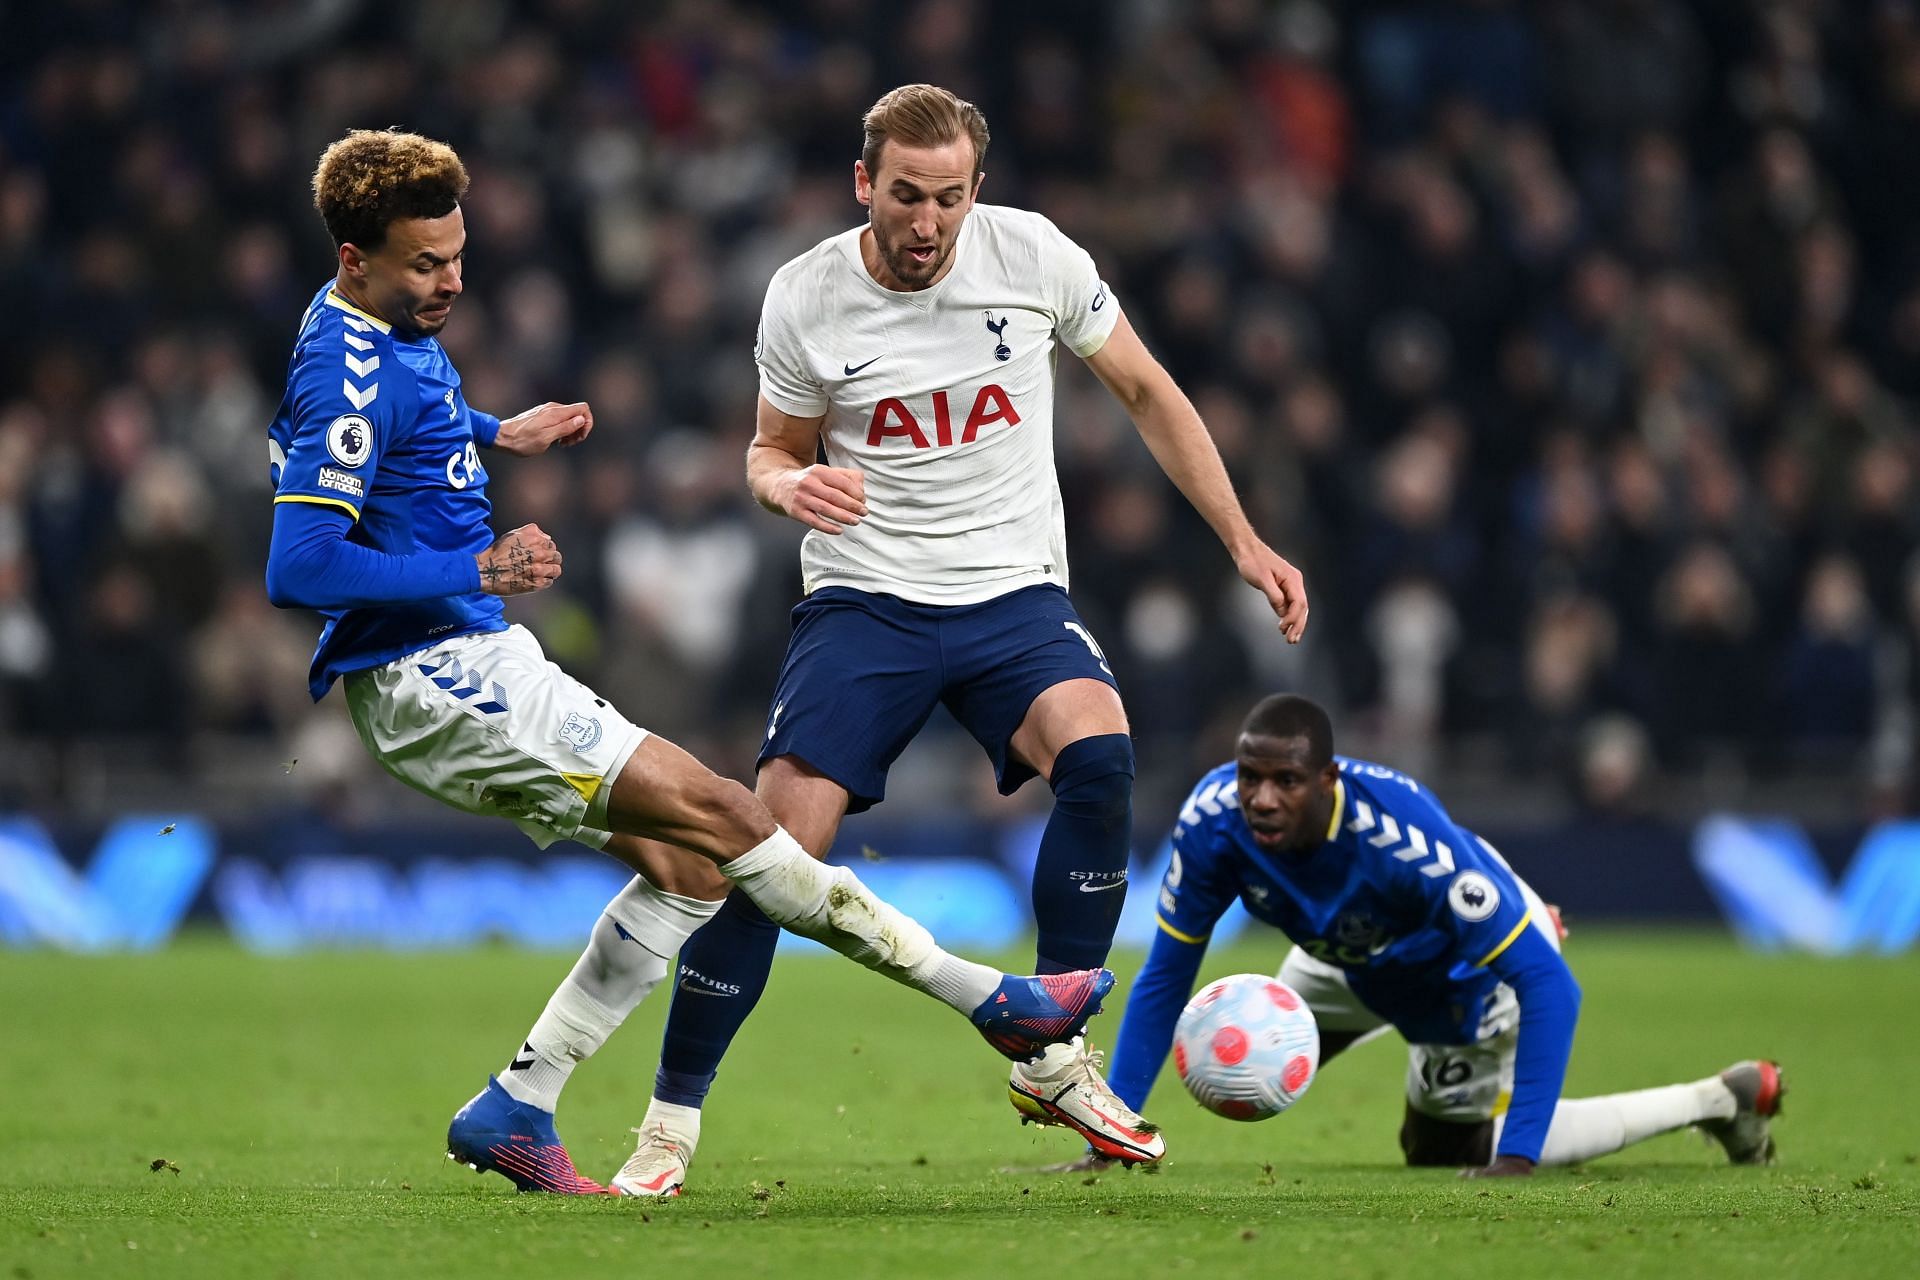 Everton suffered a 0-5 loss against Tottenham